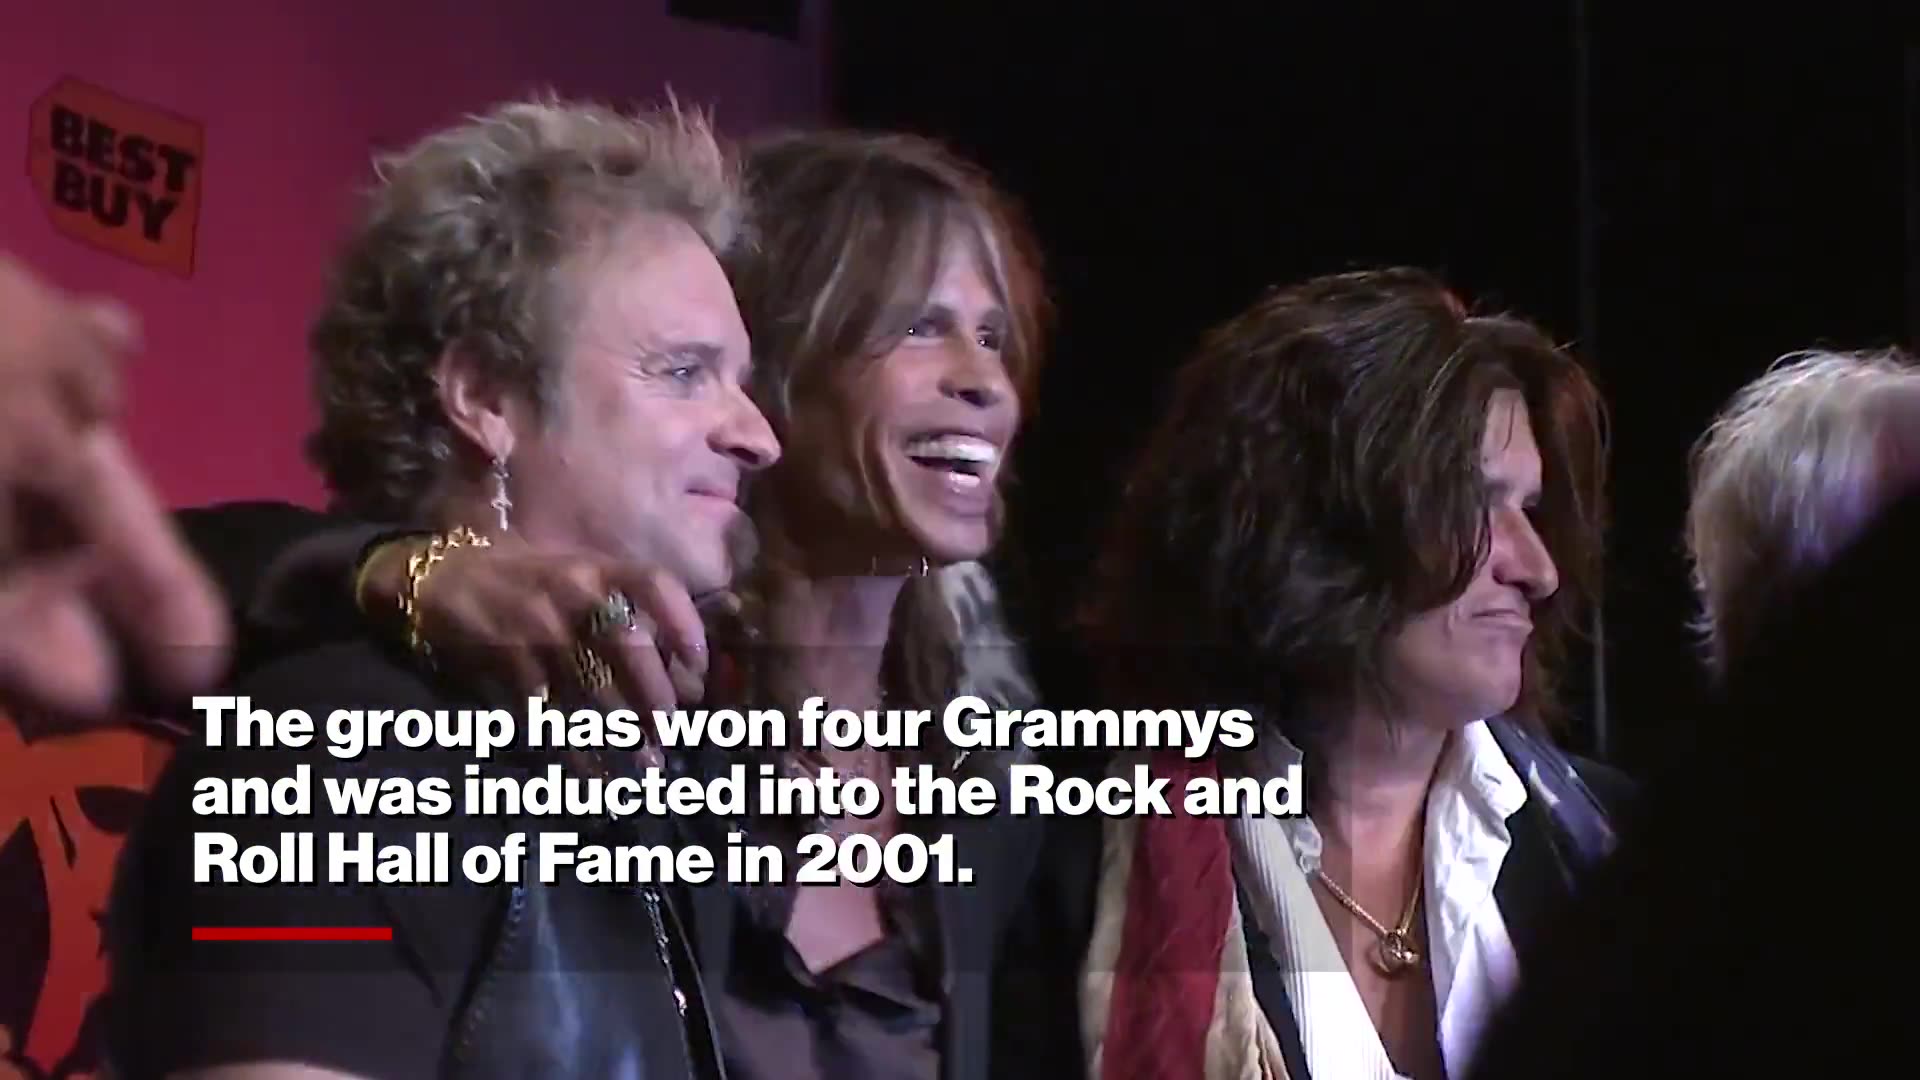 Aerosmith announces they're retiring from touring after Steven Tyler unable to recover from vocal injury